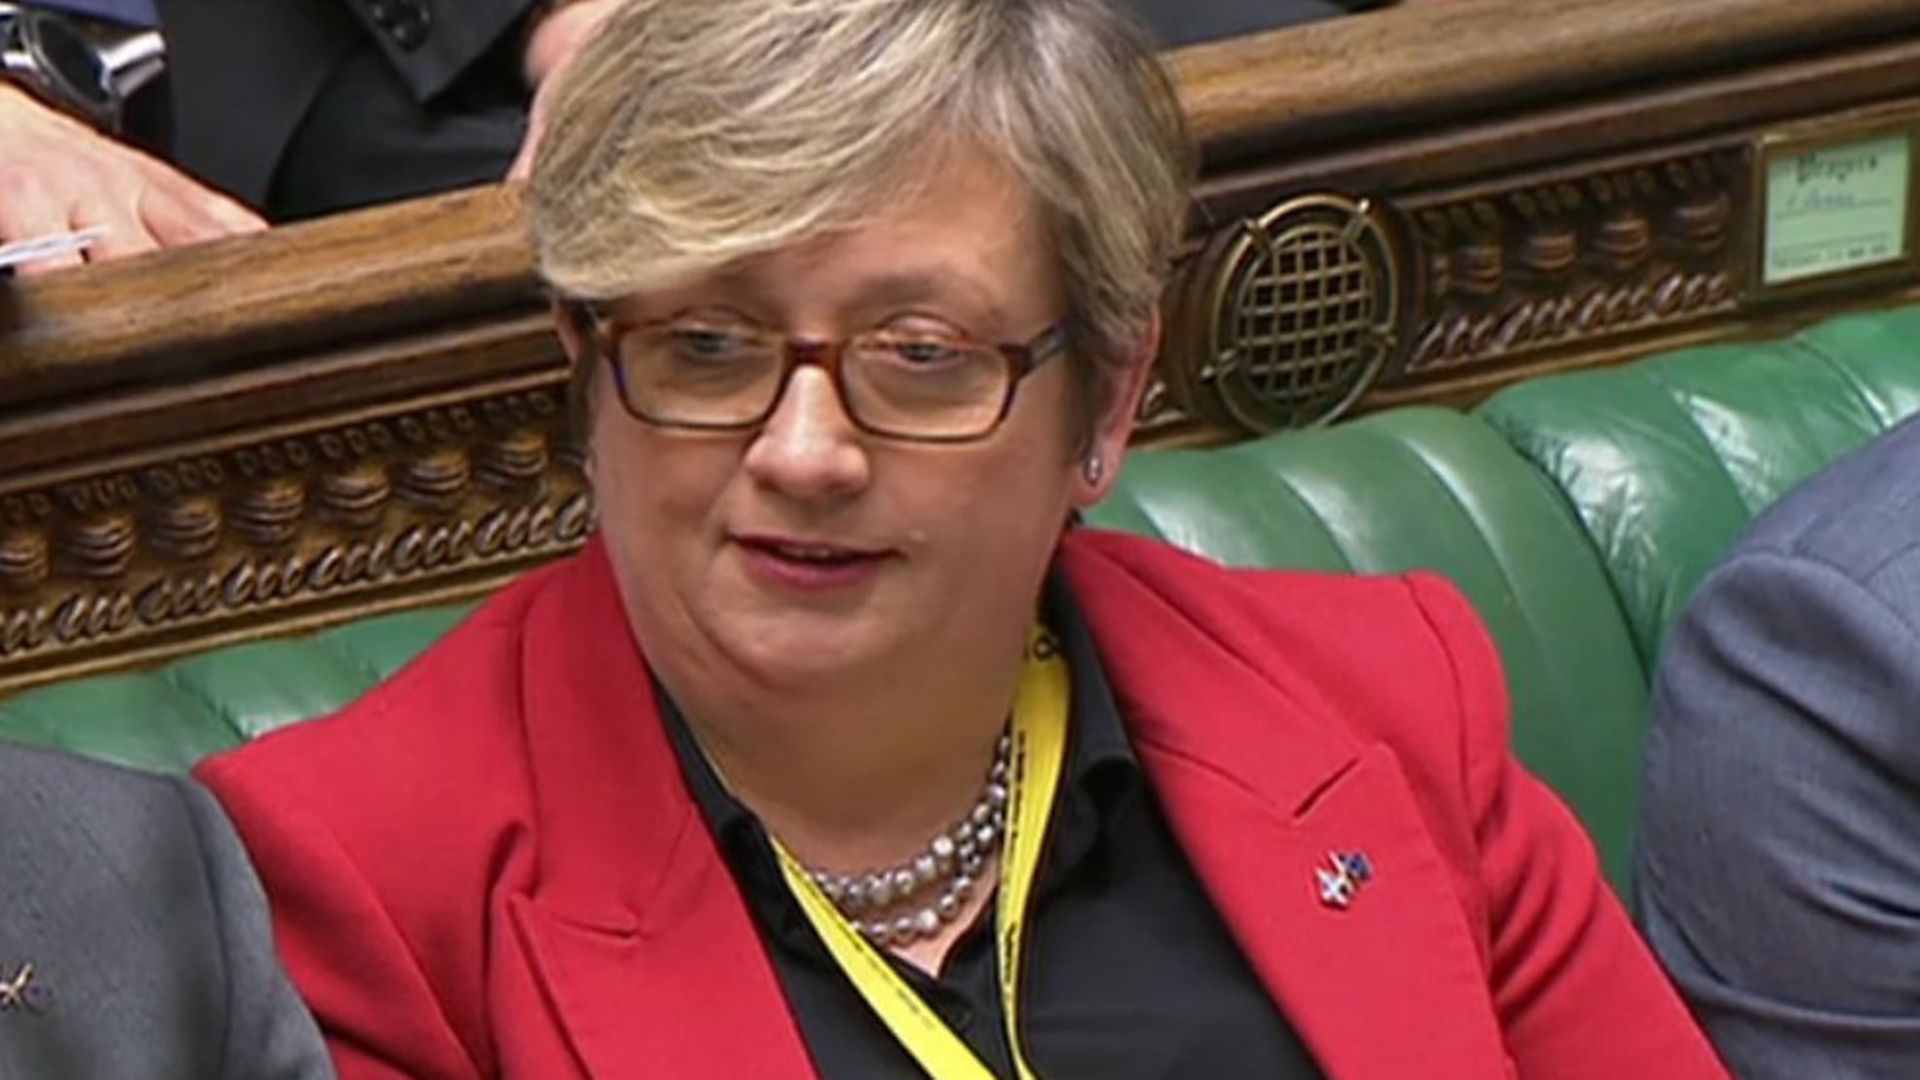 SNP MP Joanna Cherry in the House of Commons - Credit: PA Wire/PA Images